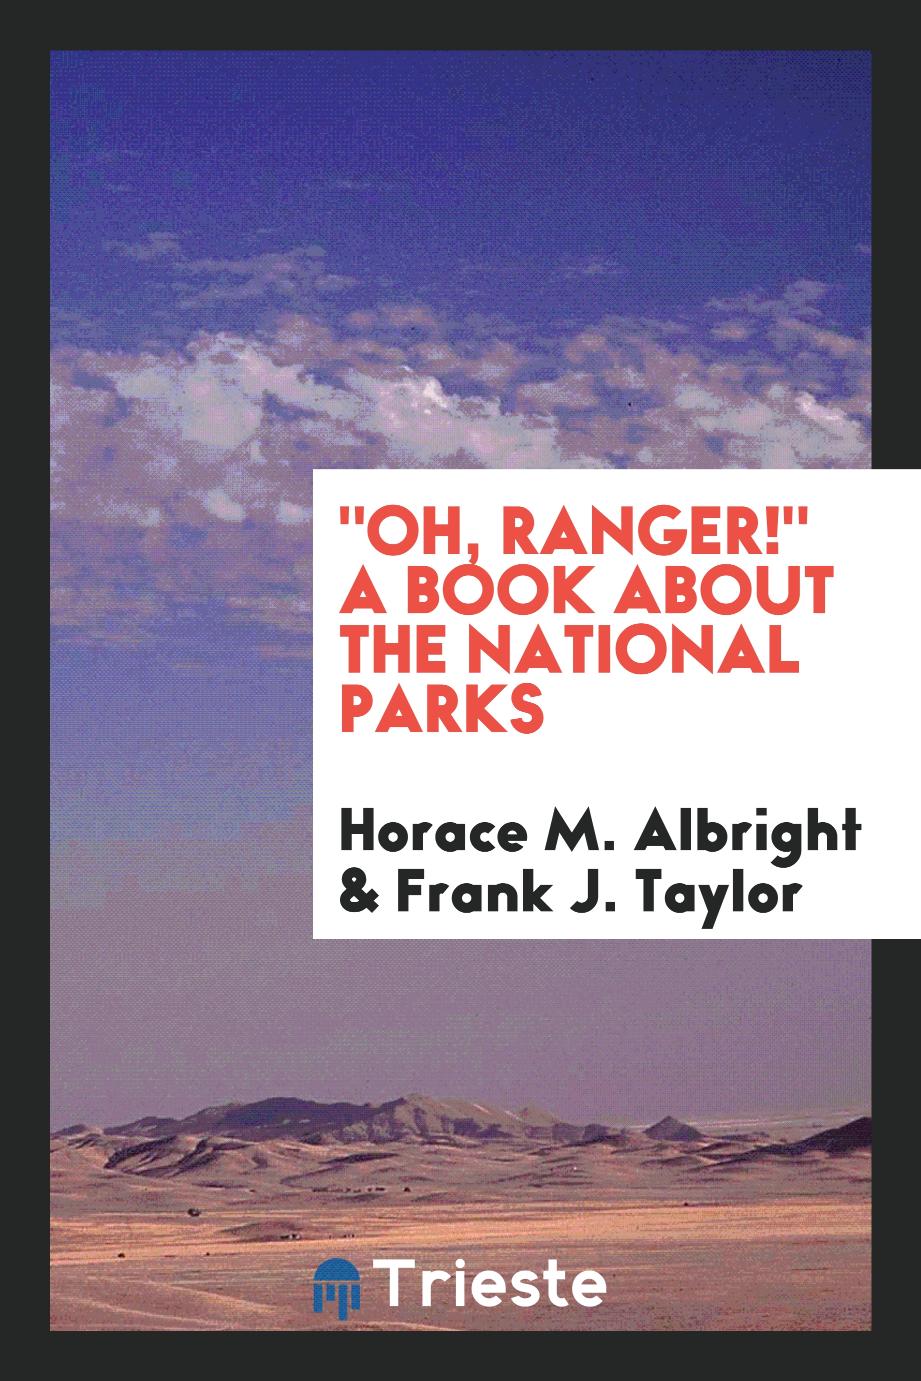 "Oh, ranger!" A book about the national parks